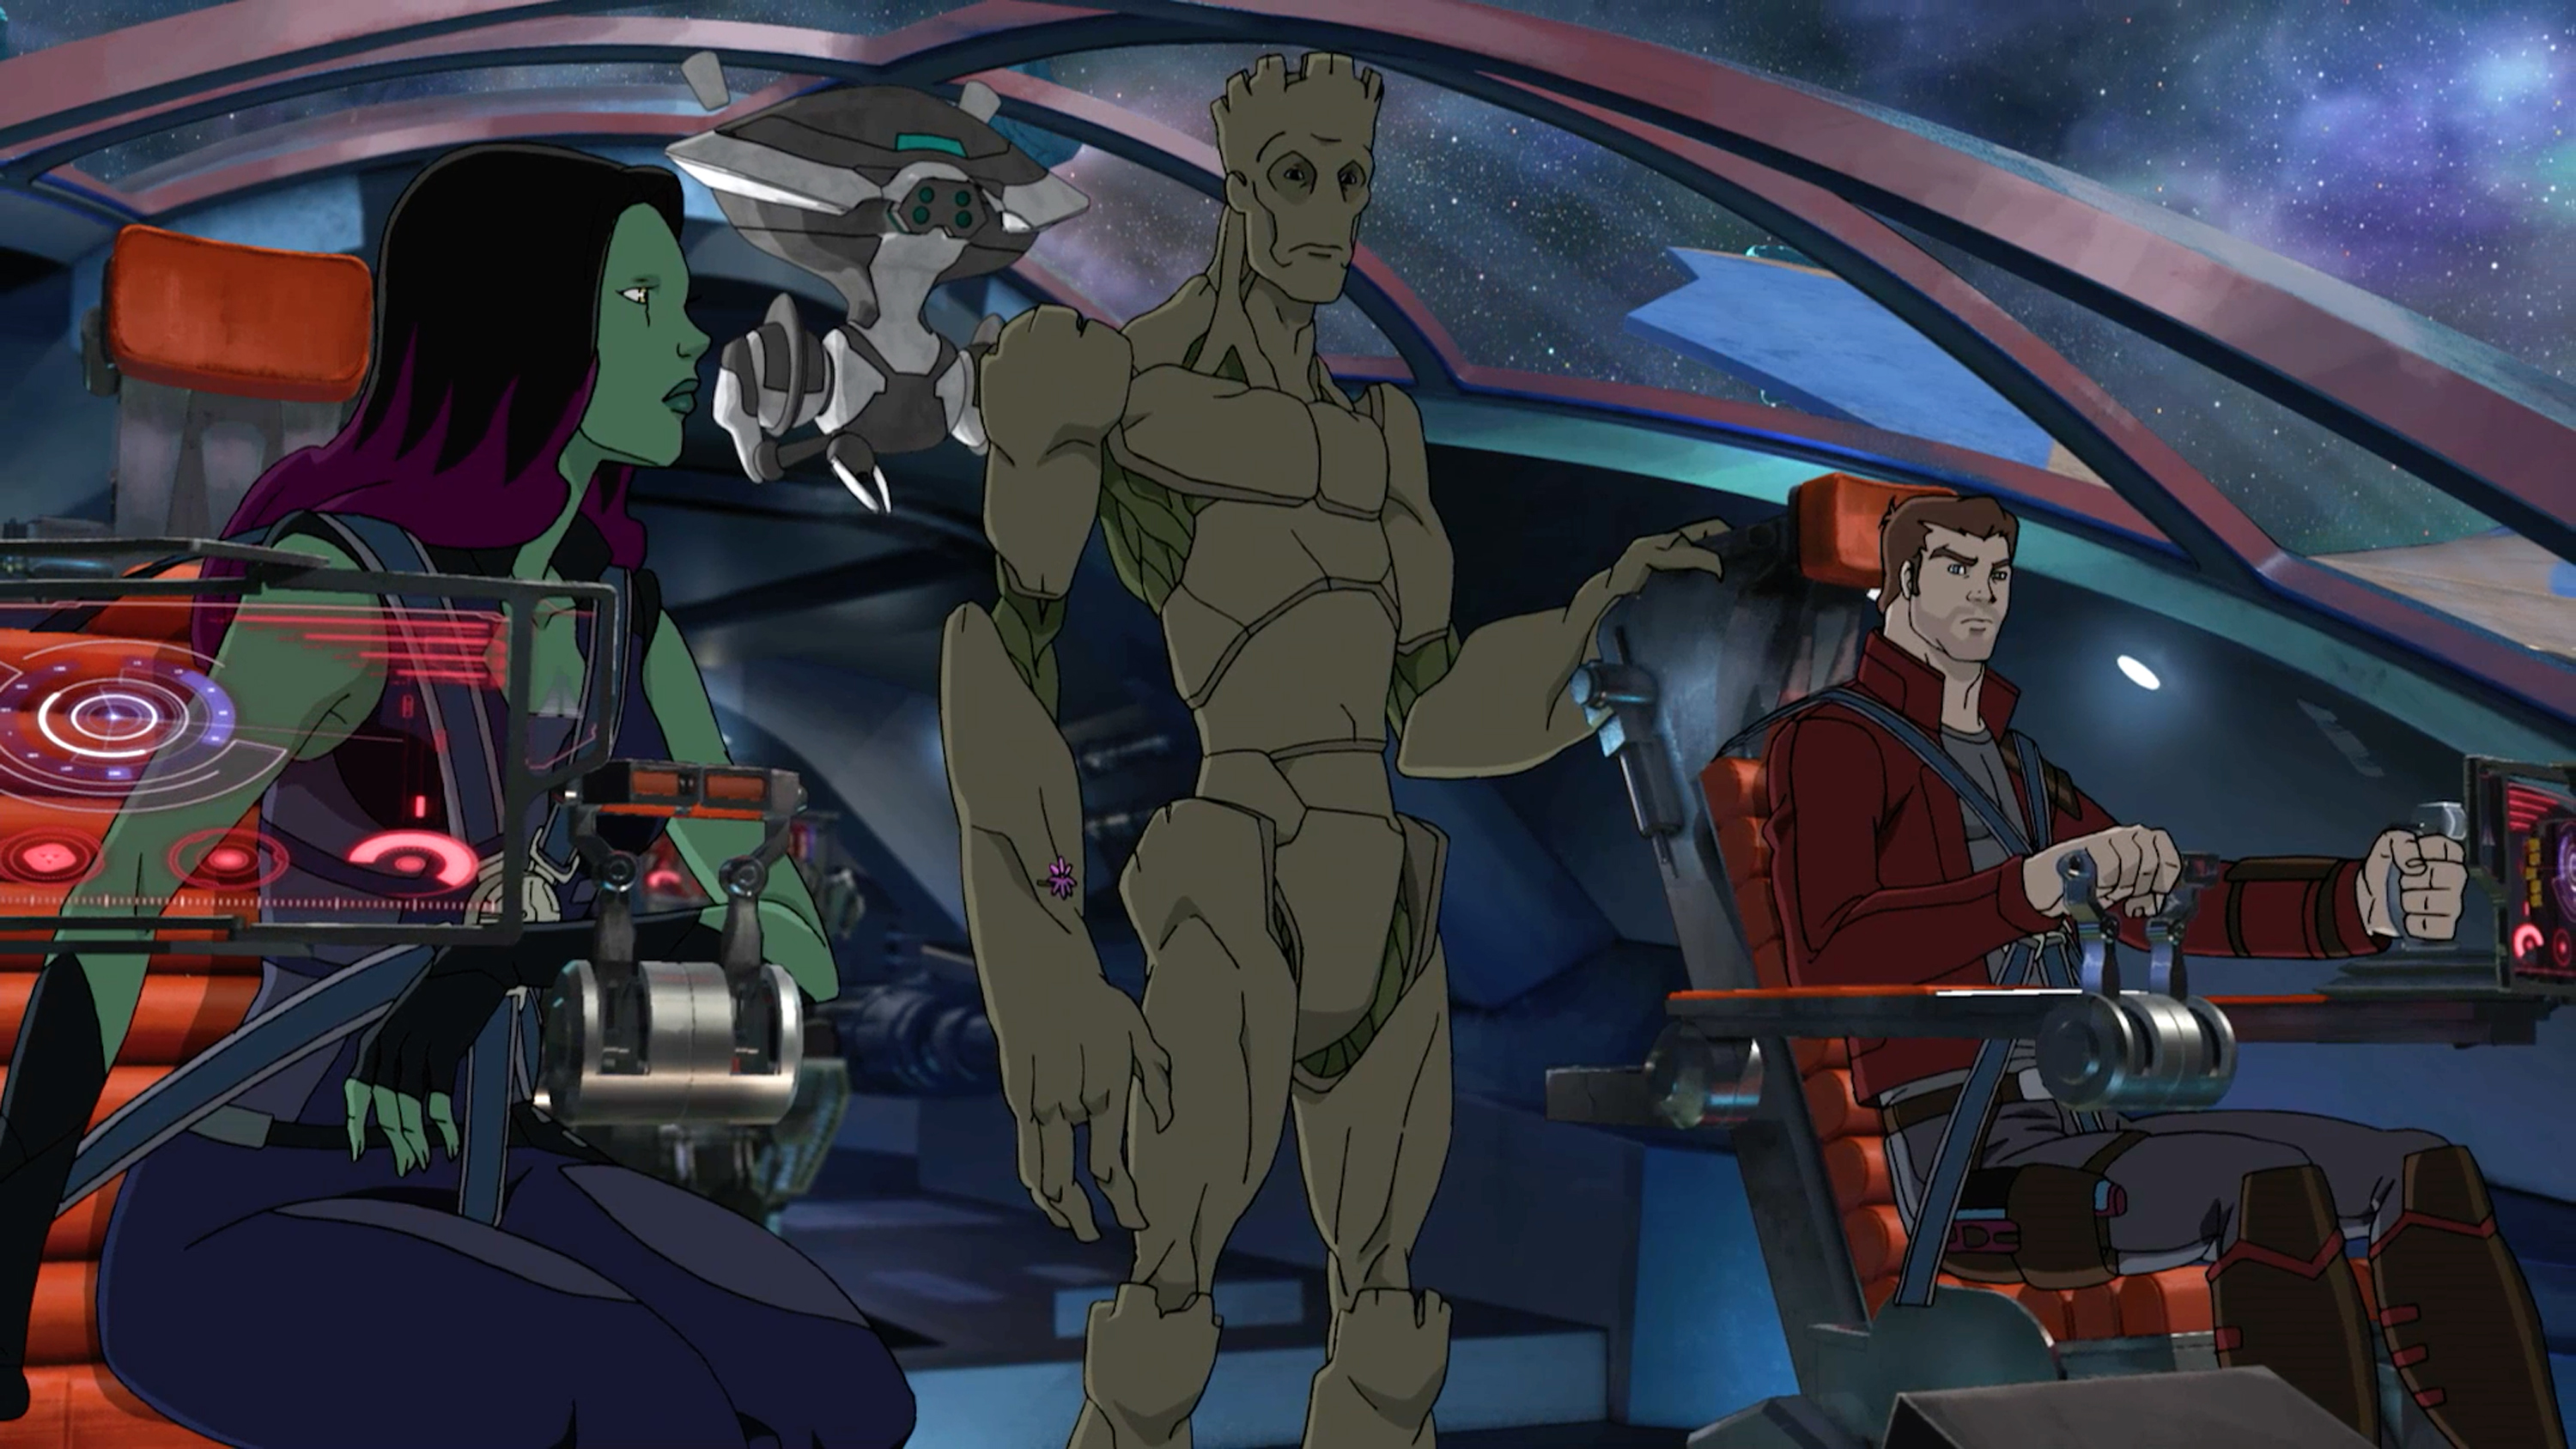 MARVEL'S GUARDIANS OF THE GALAXY - "One in a Million You" - Feeling underappreciated, Rocket accepts an offer to work for The Collector, only to realize his "job" is working as another prisoner in The Collector's collection. This episode of "Marvel's Guardians of the Galaxy" will air Saturday, October 3 (9:30 PM - 10:00 PM ET/PT), on Disney XD. (Disney XD) GAMORA, GROOT, PETER QUILL